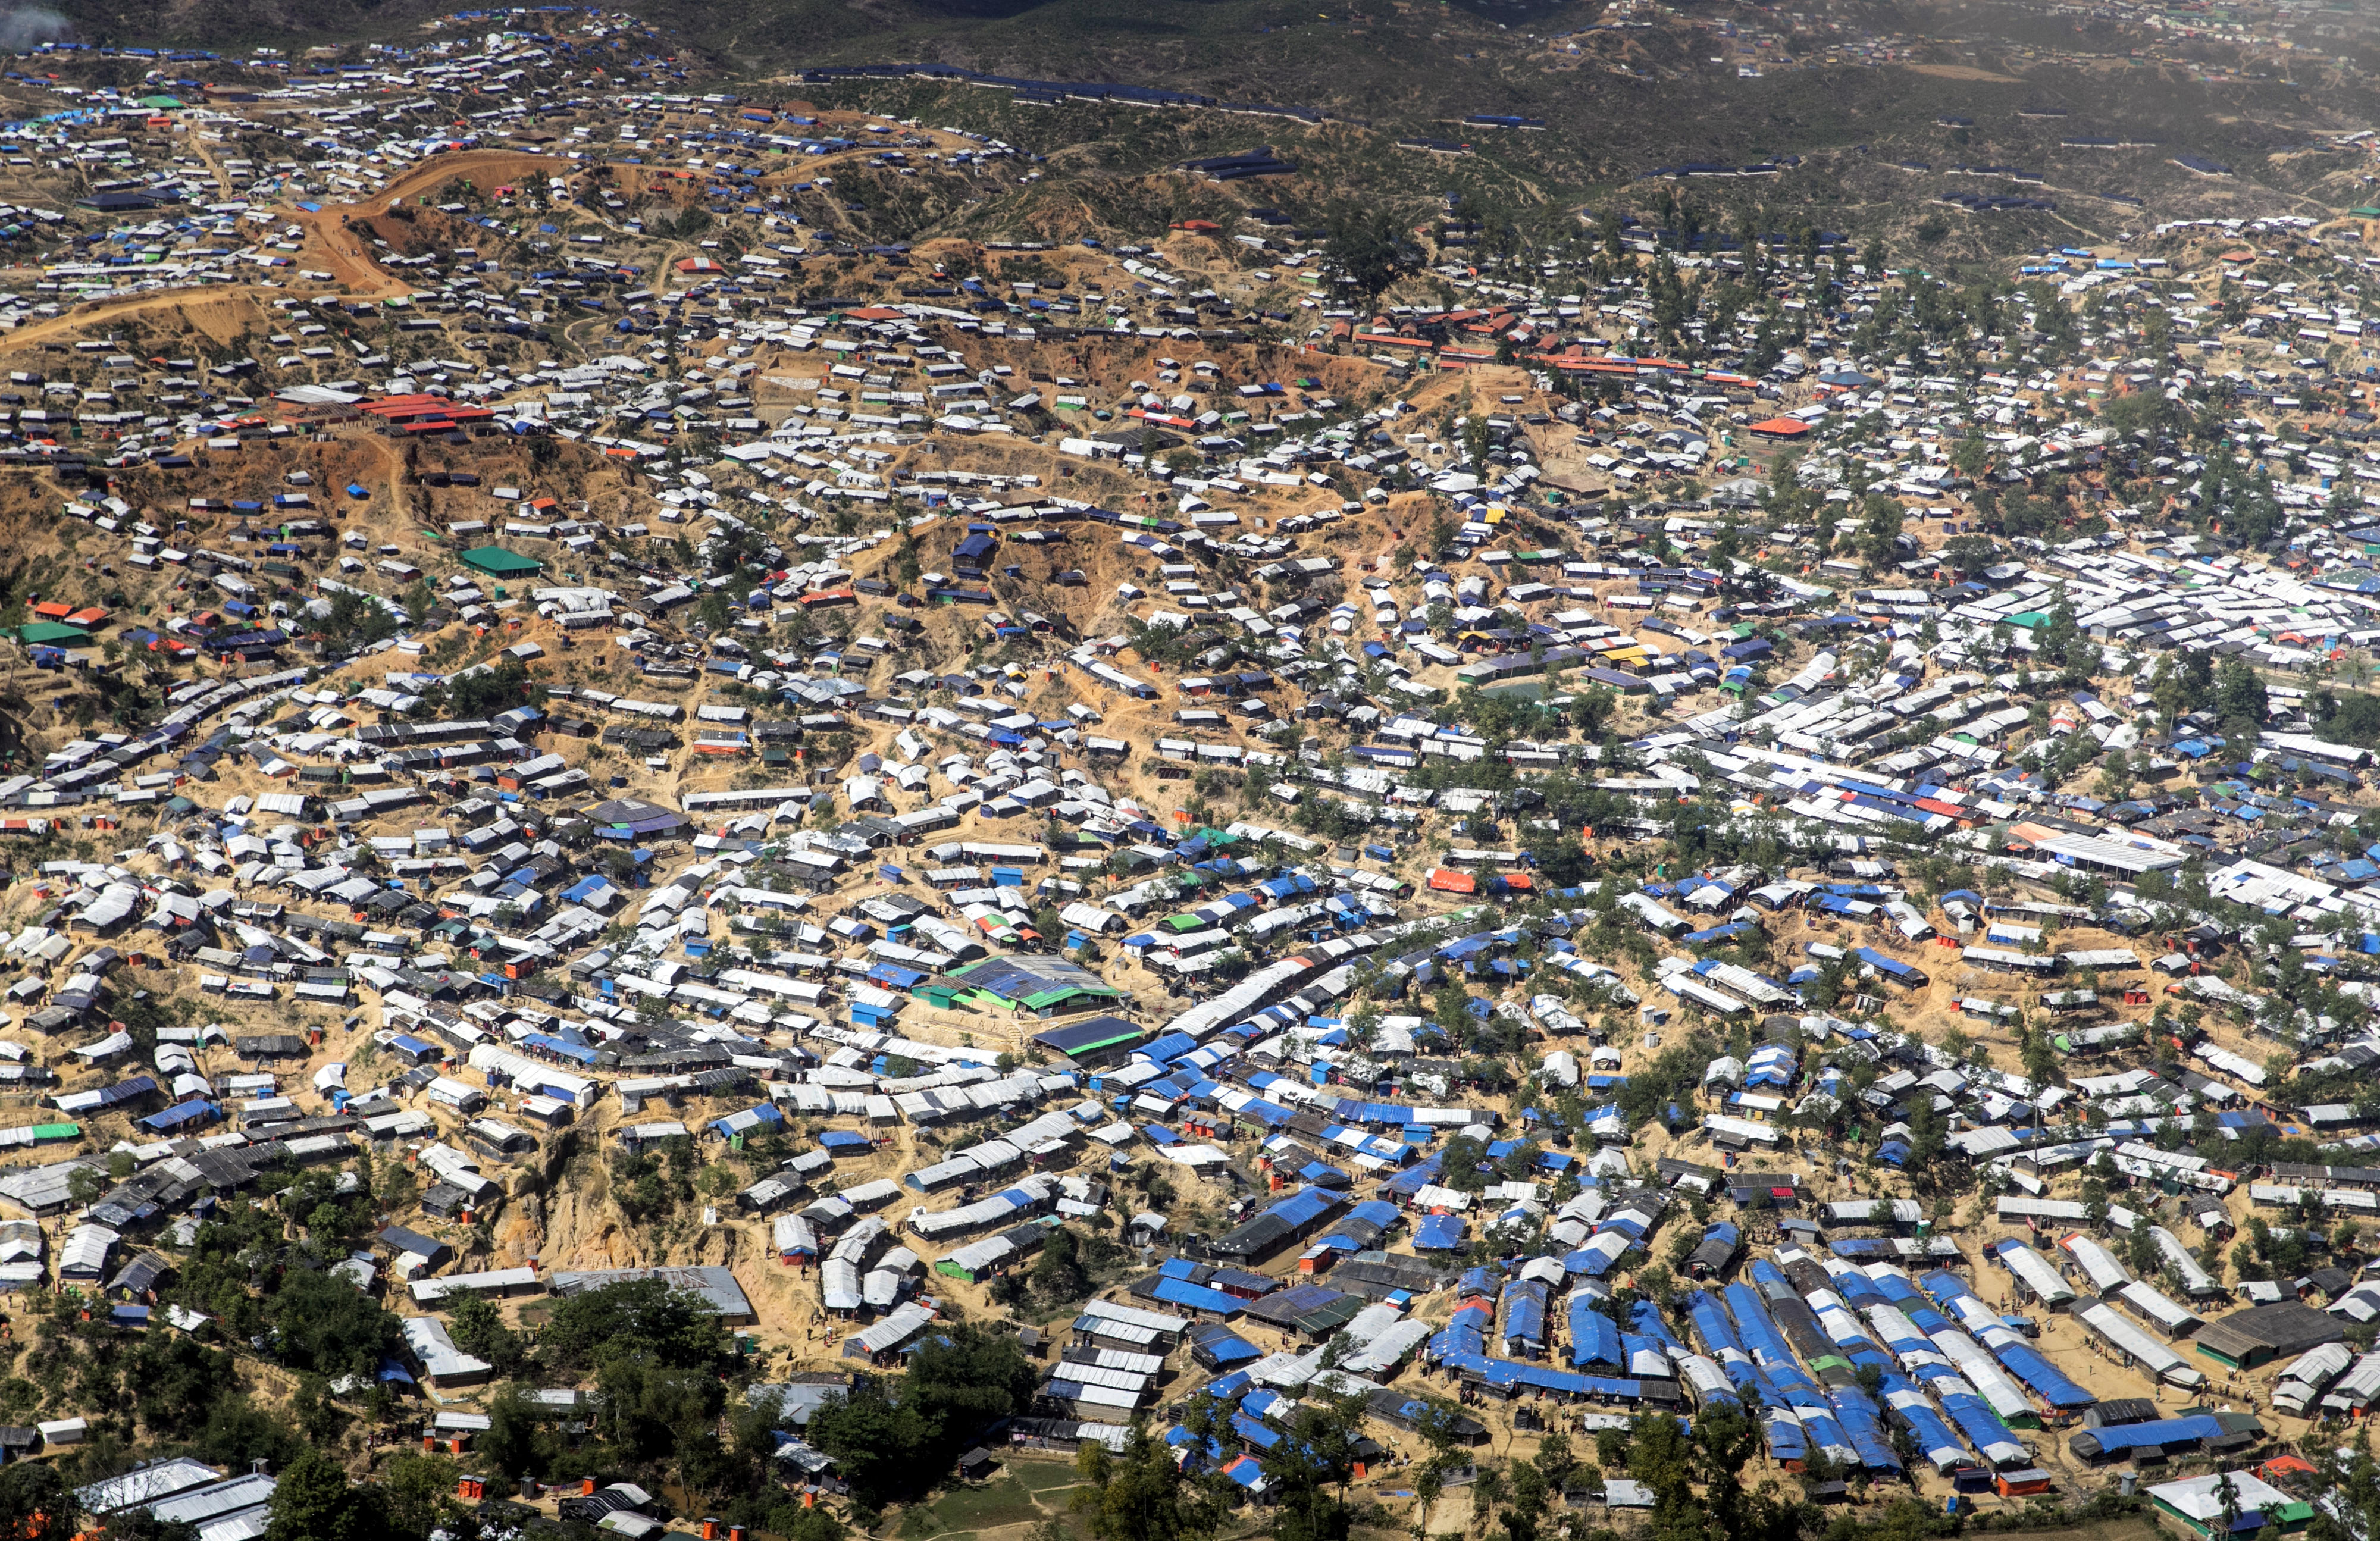 Aerial photograph of the refugee camp Kutupalong in Bangladesh, where Rohingya who were expelled from Myanmar live.